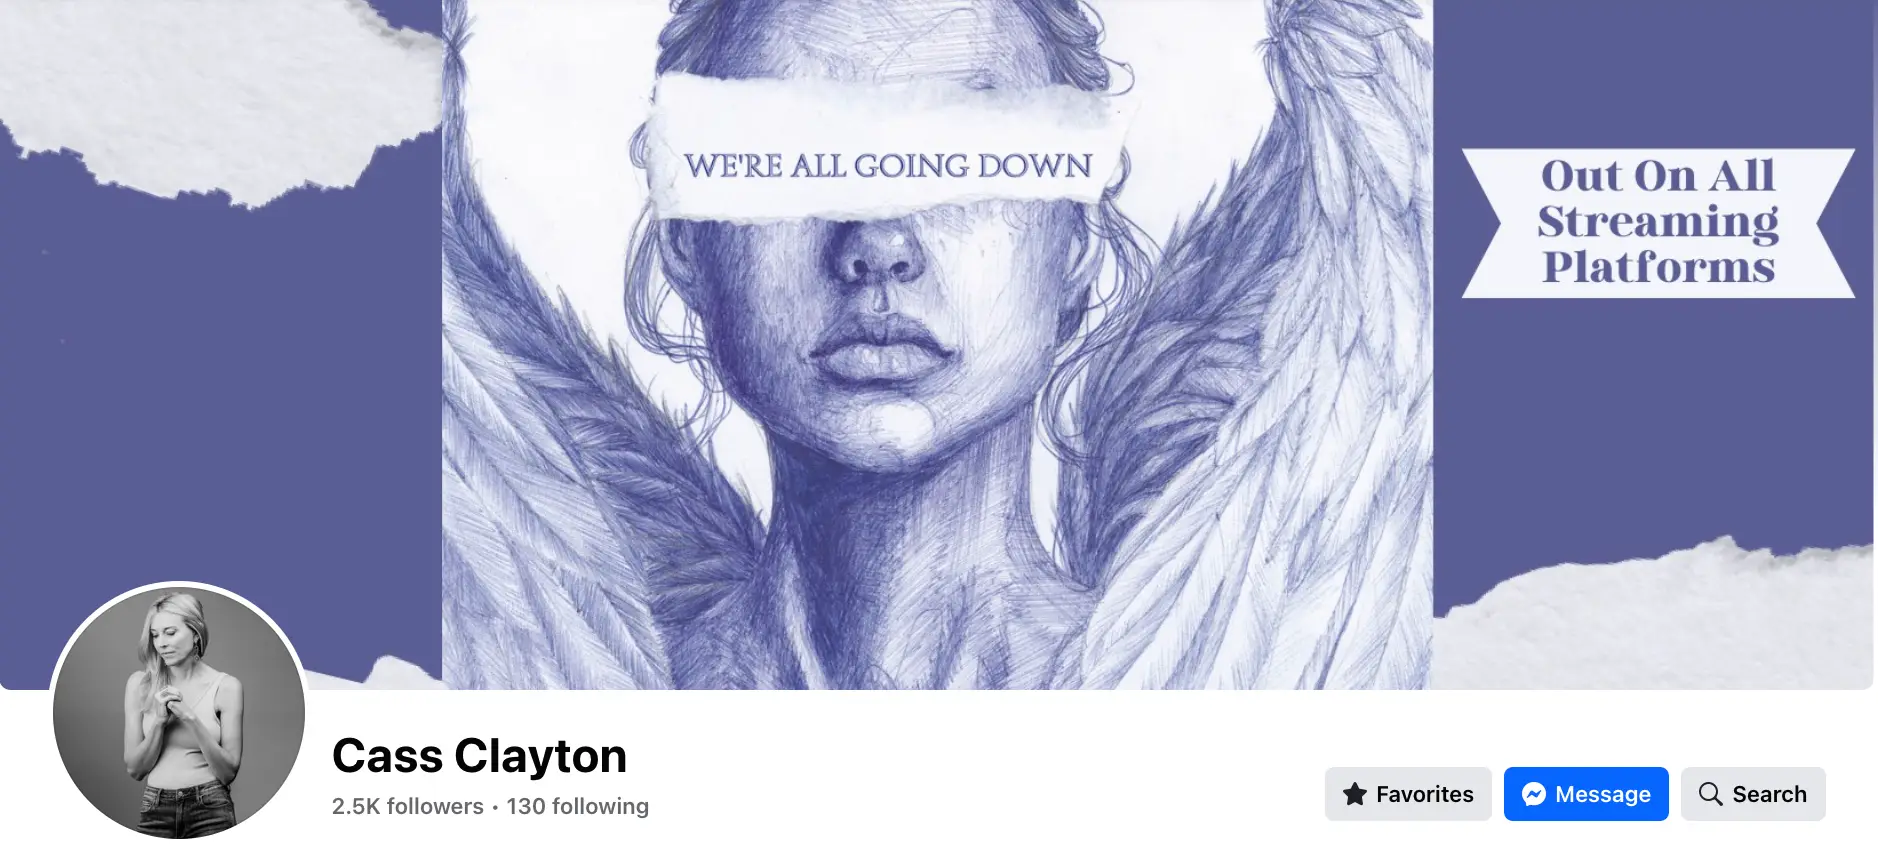 Cass Clayton Facebook channel landing page